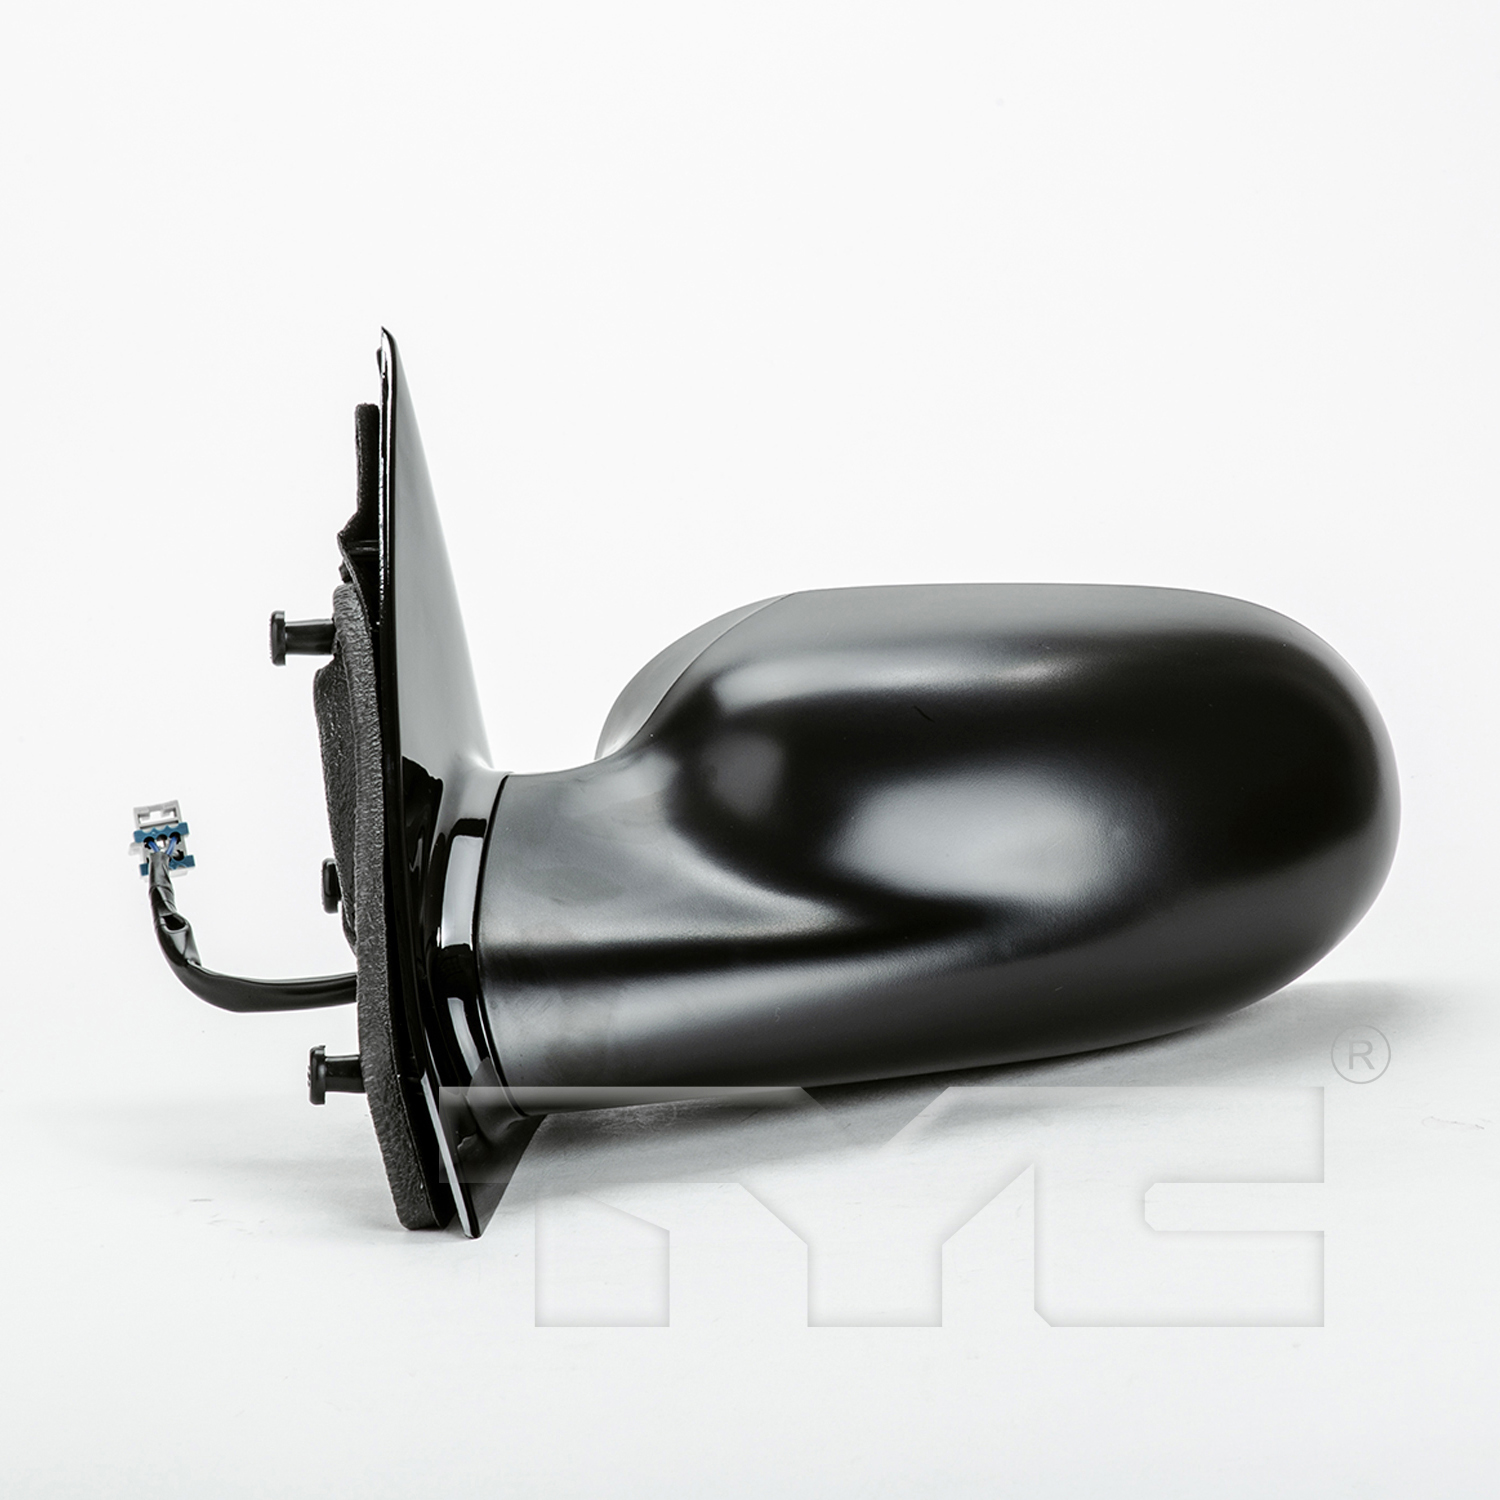 Aftermarket MIRRORS for SATURN - LW1, LW1,00-00,LT Mirror outside rear view